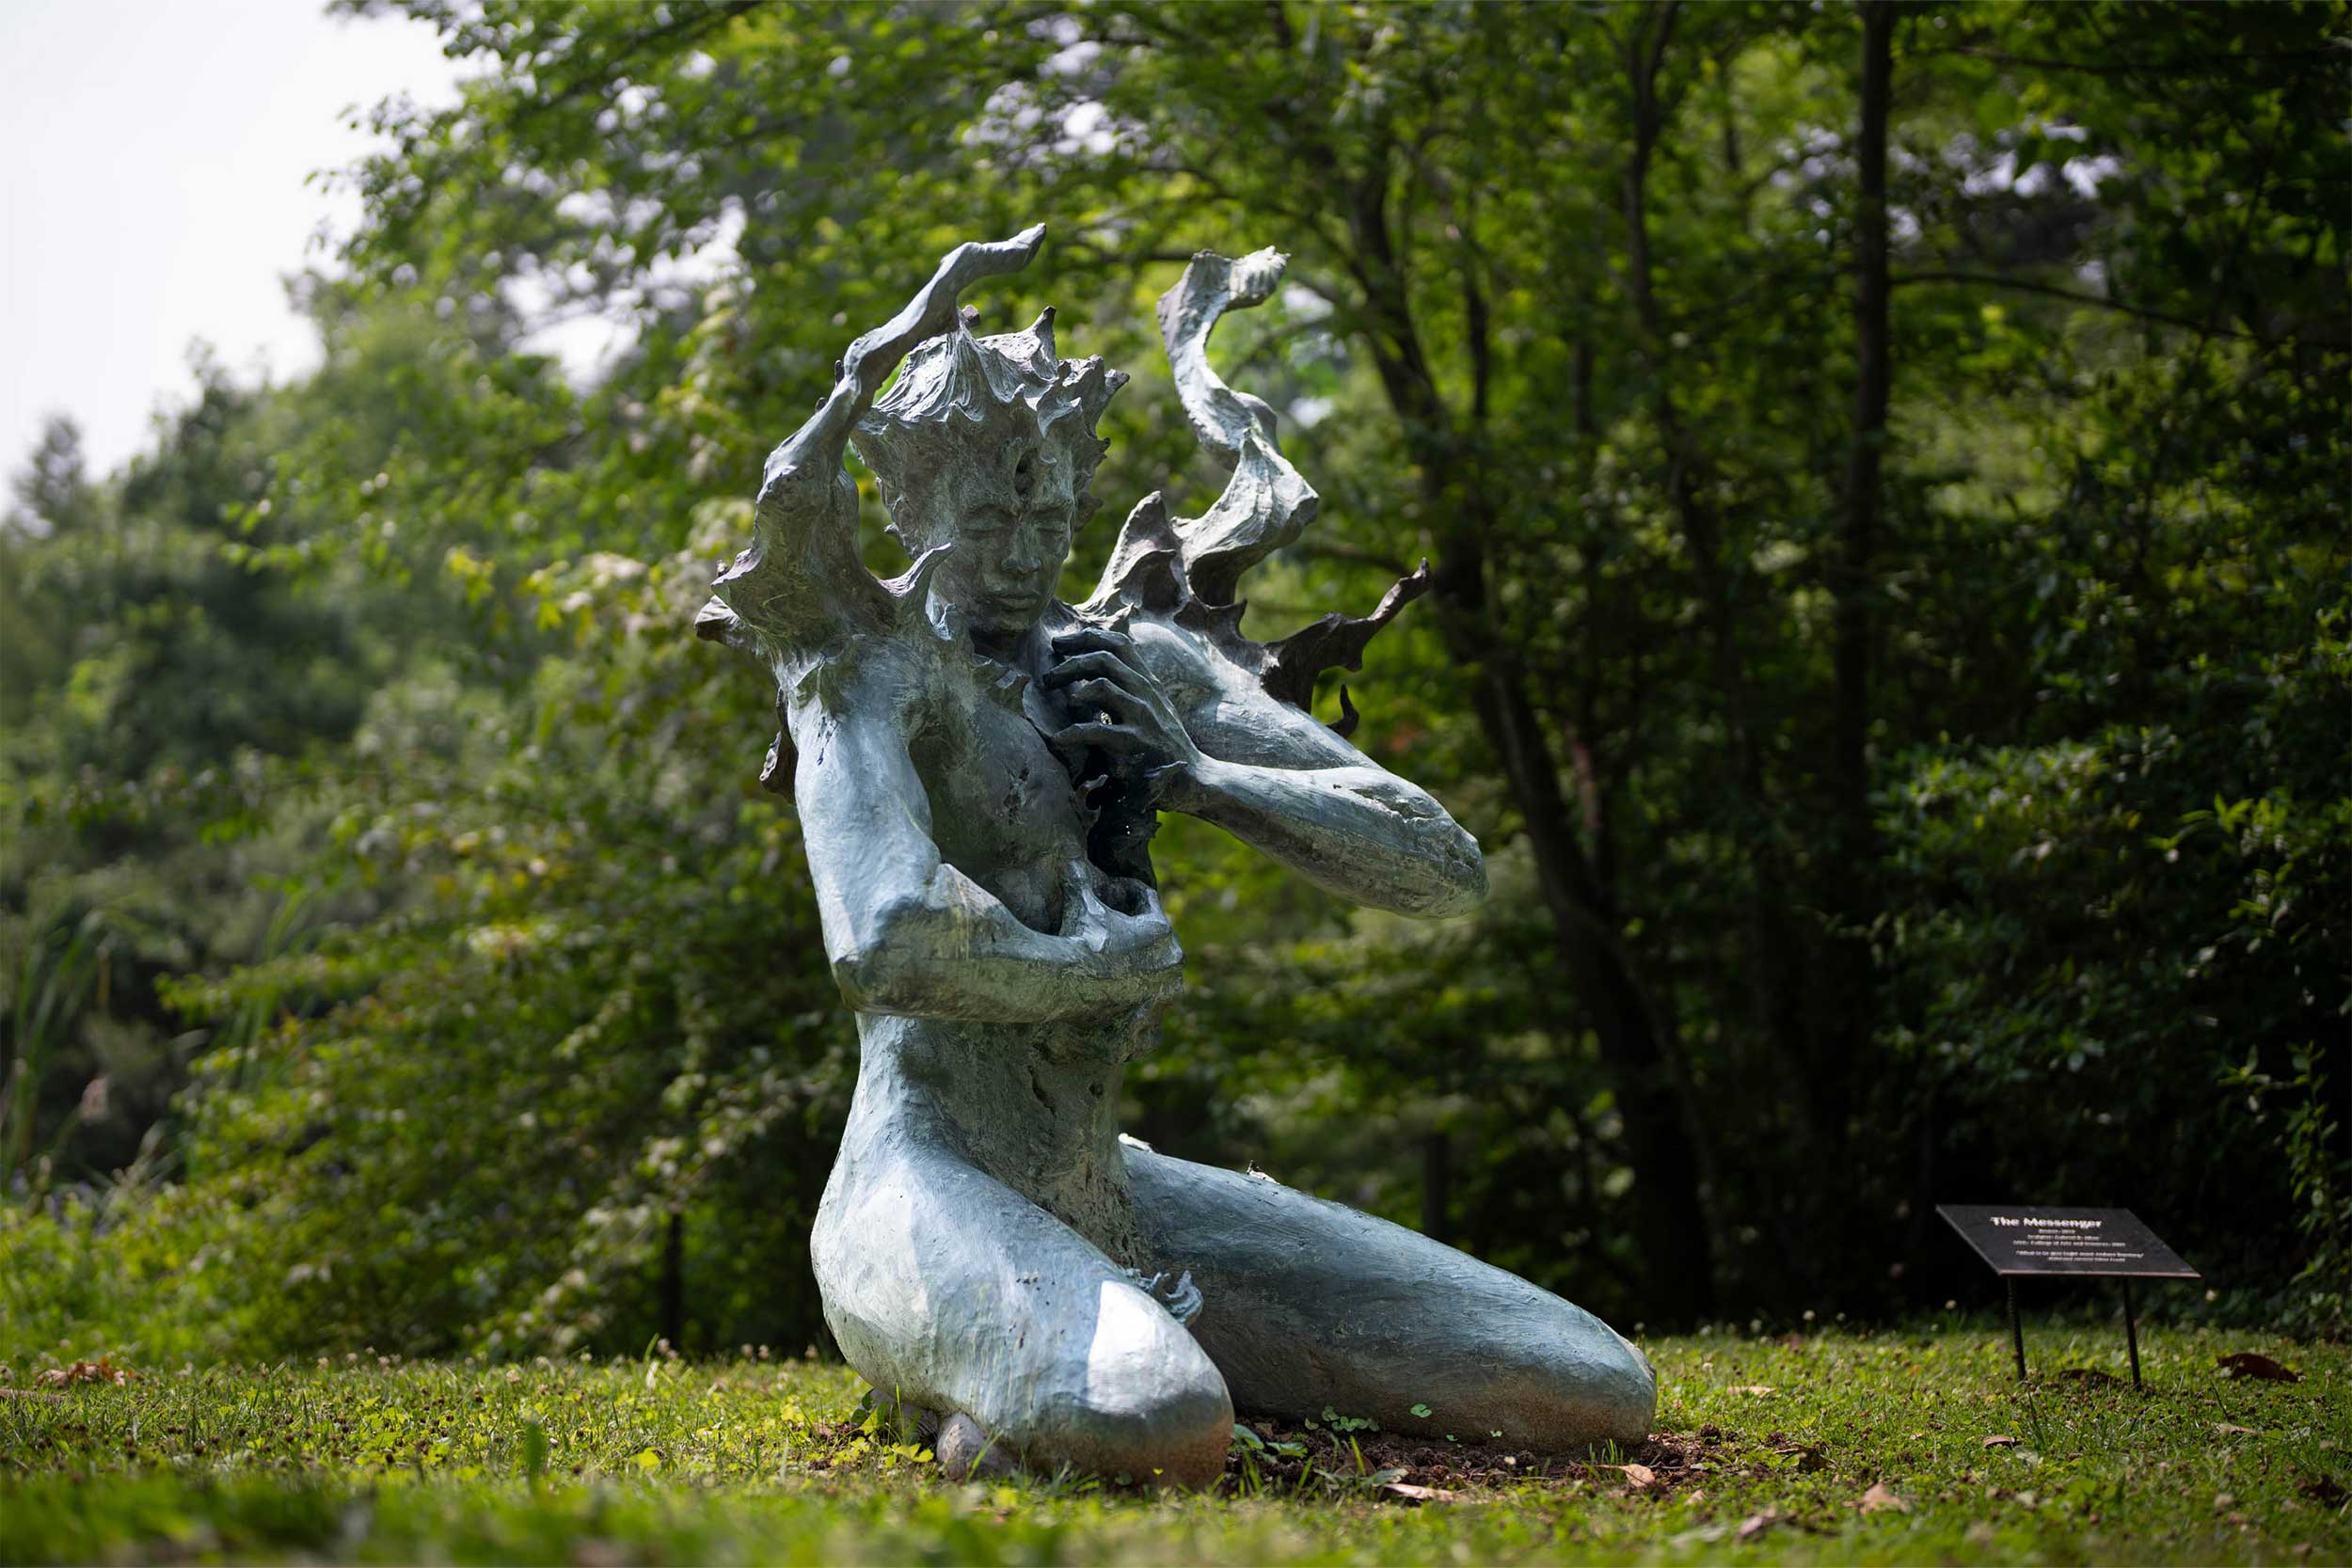 "The Messenger", a sculpture by Gabe Allan, depicts a man made of stone who appears to be pulling his heart from his chest.